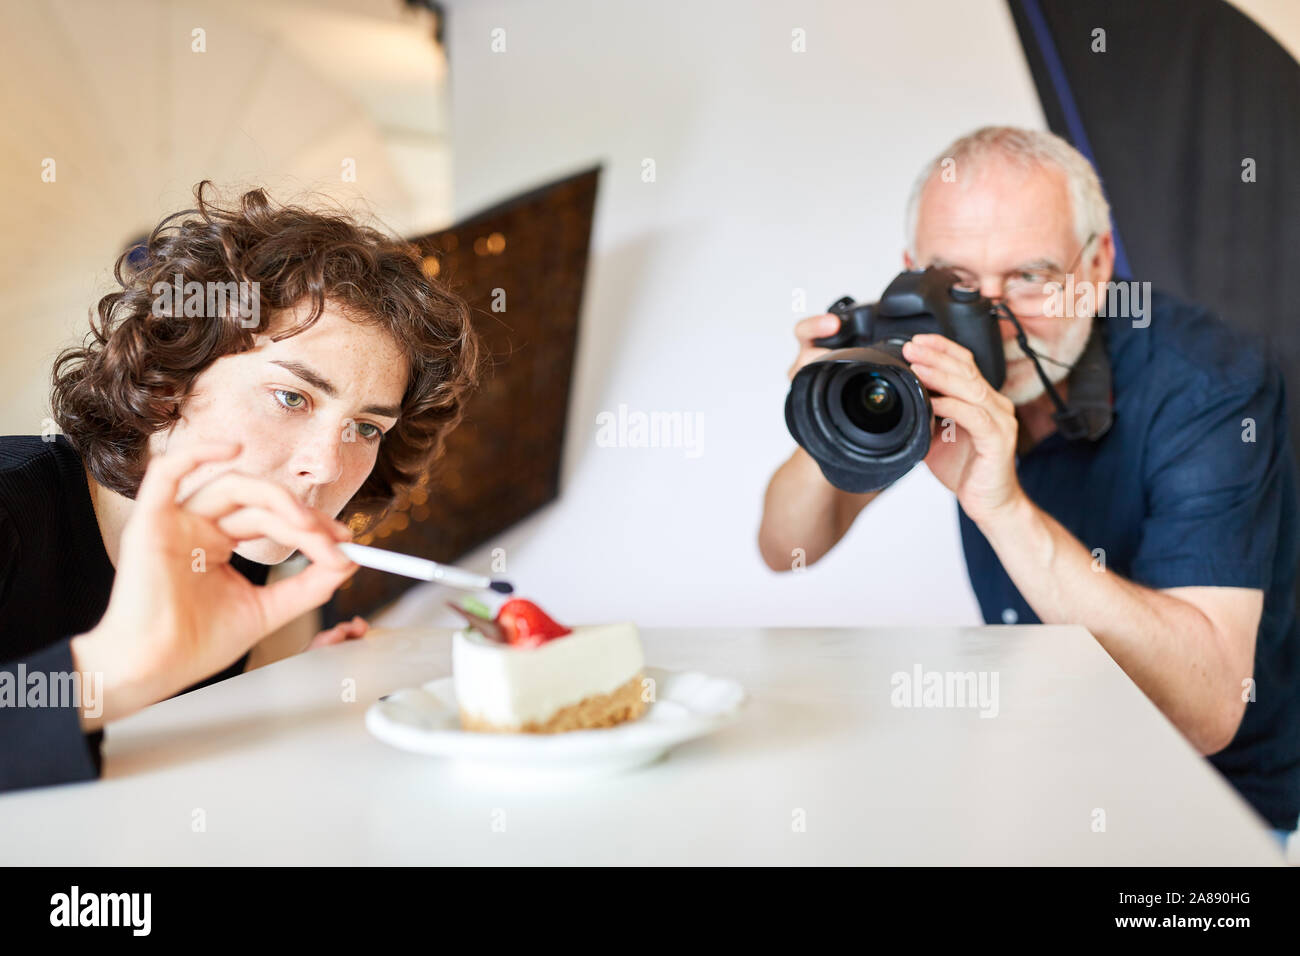 Photo assistant in food styling as preparation for food photography Stock Photo